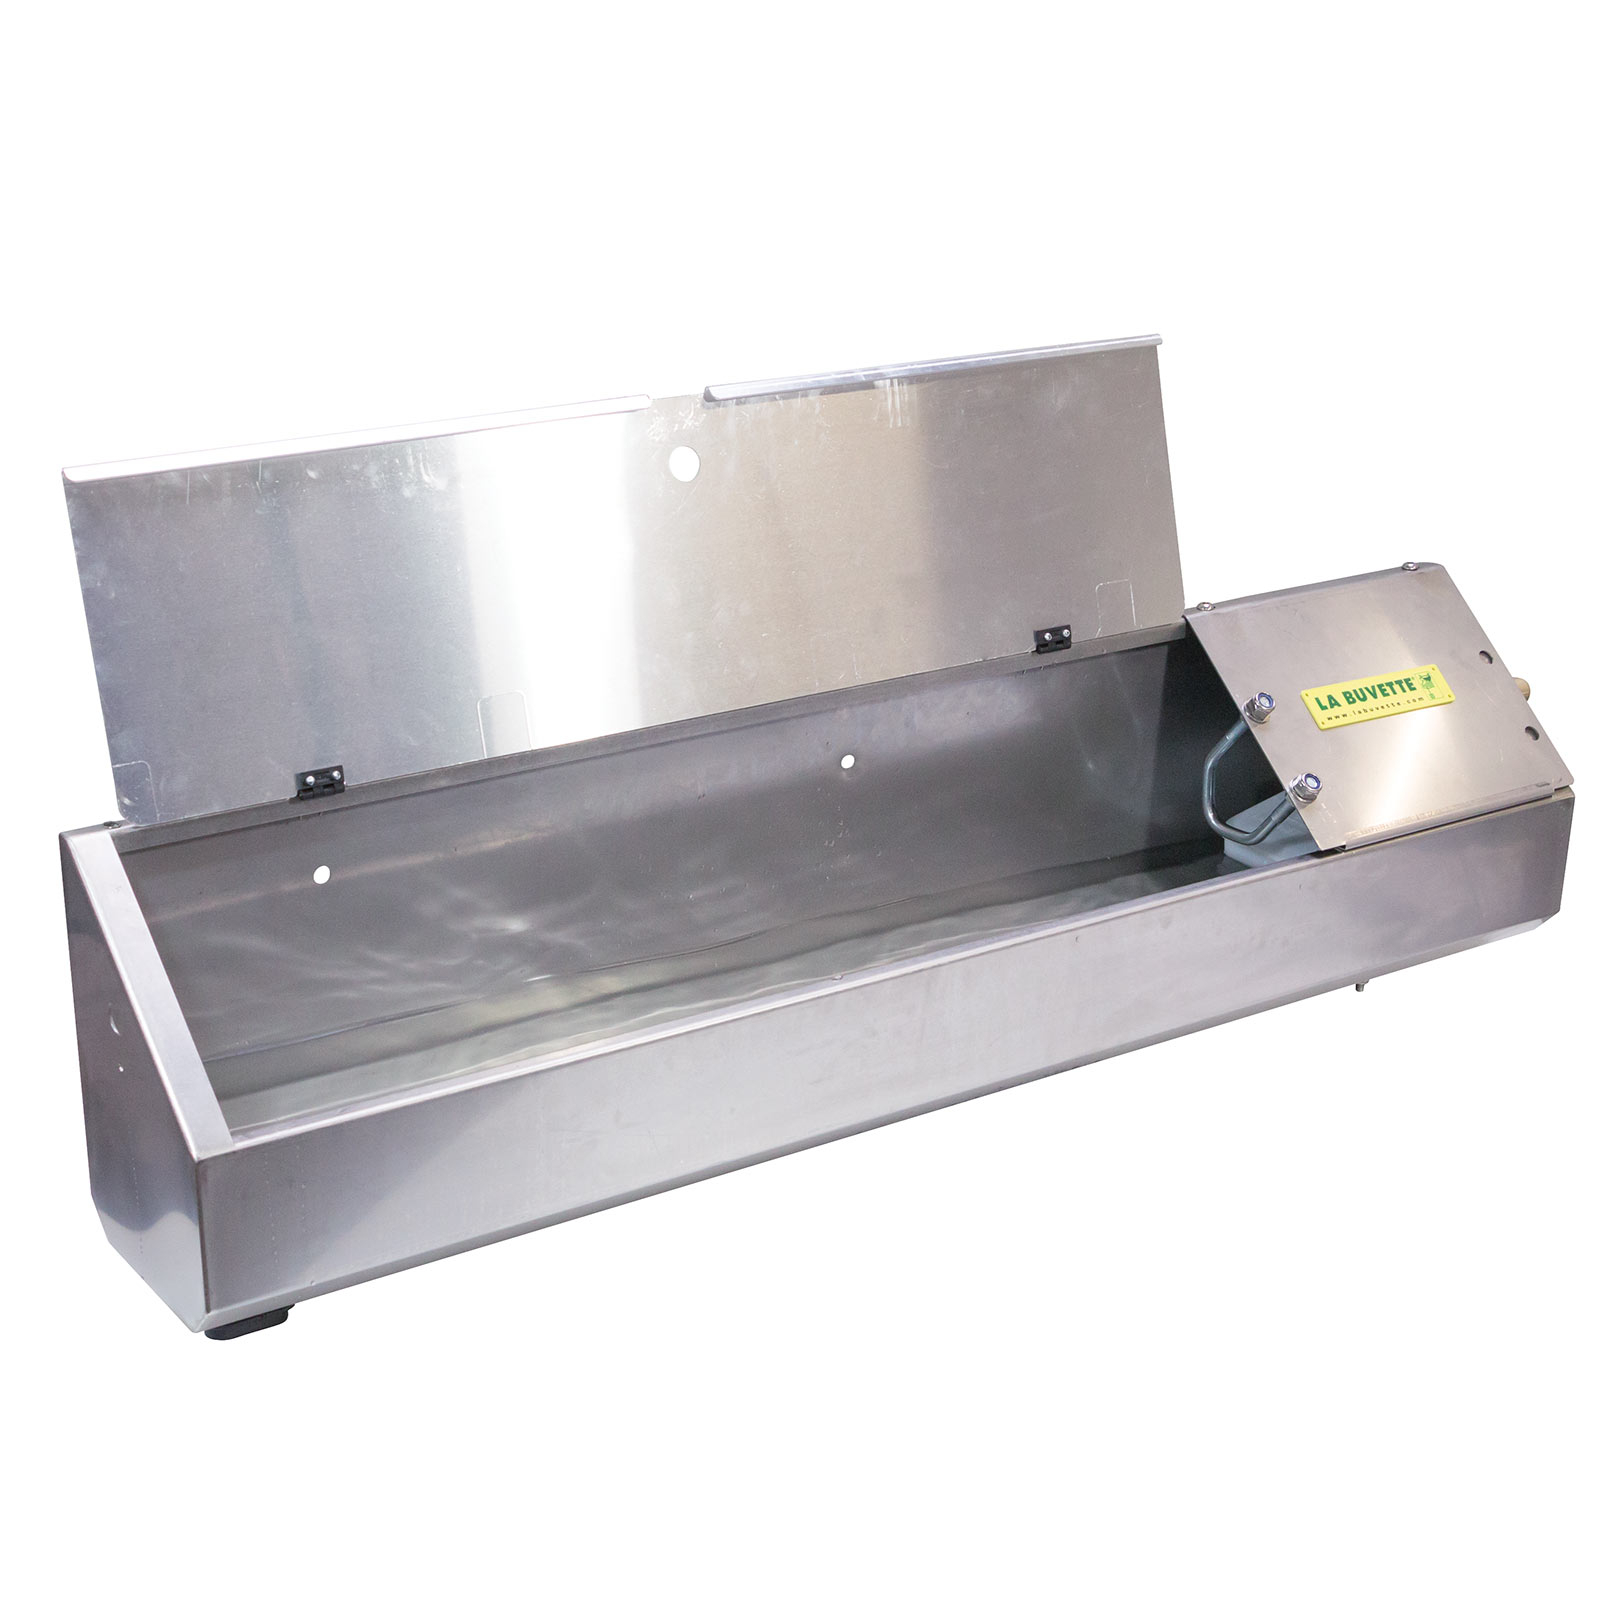 OVICAP INOX 120 Stainless steel DRINKING TROUGH